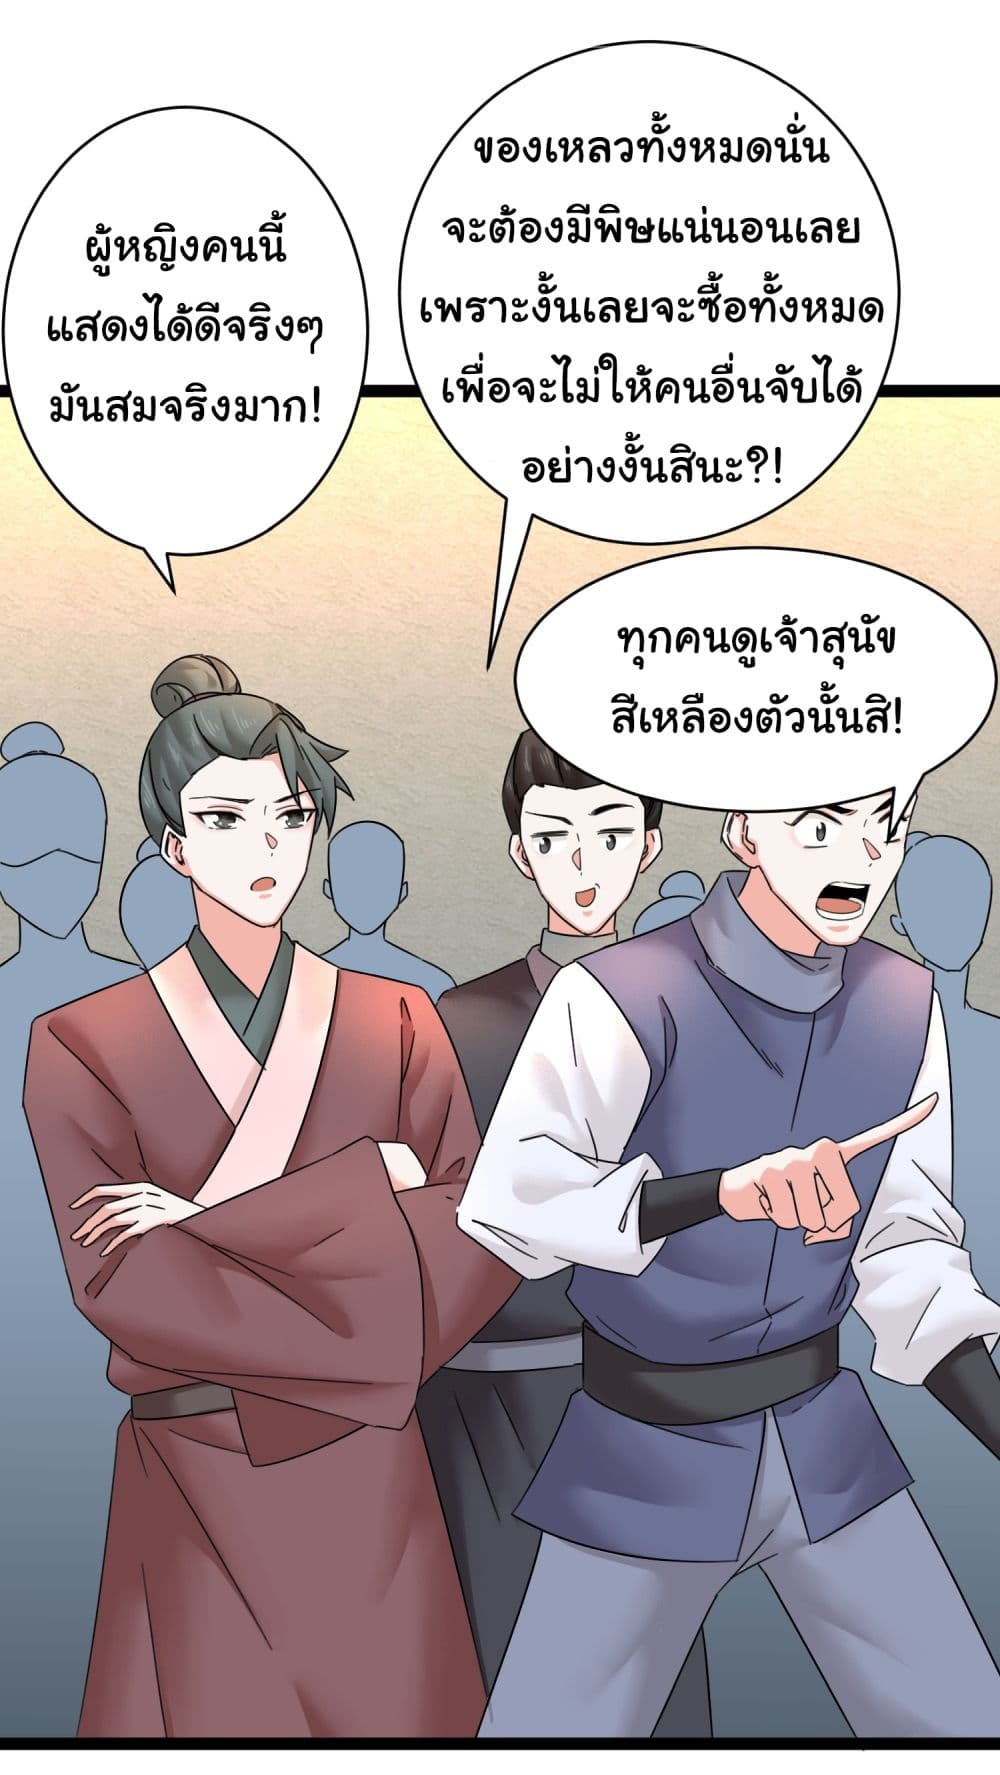 Rebirth of an Immortal Cultivator from 10,000 years ago ตอนที่ 6 (3)